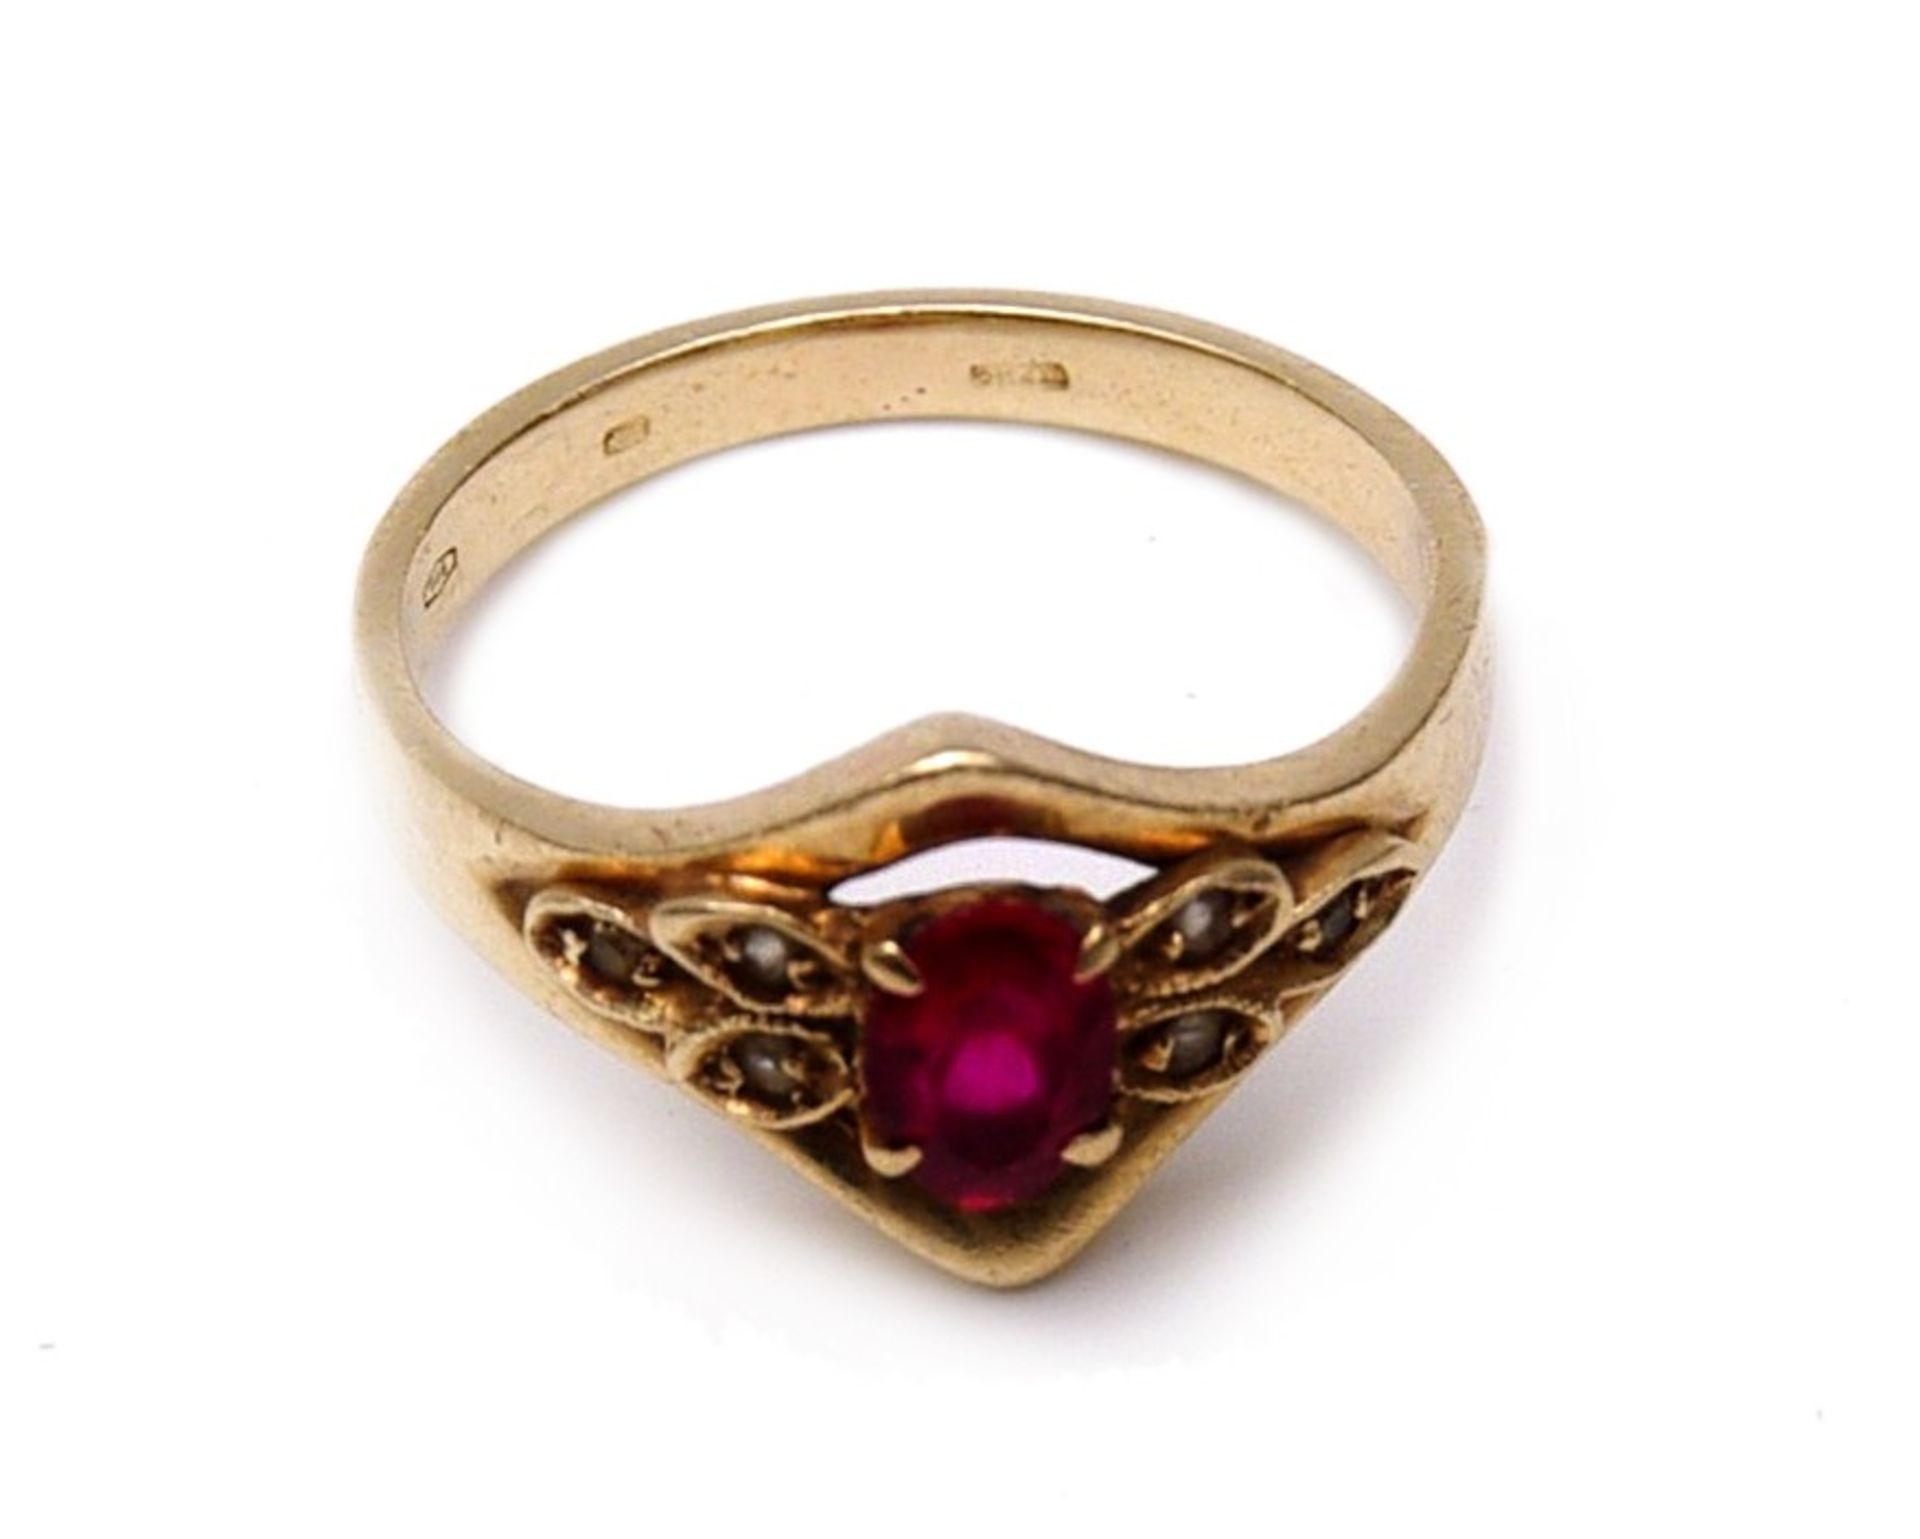 A ring with a red stone